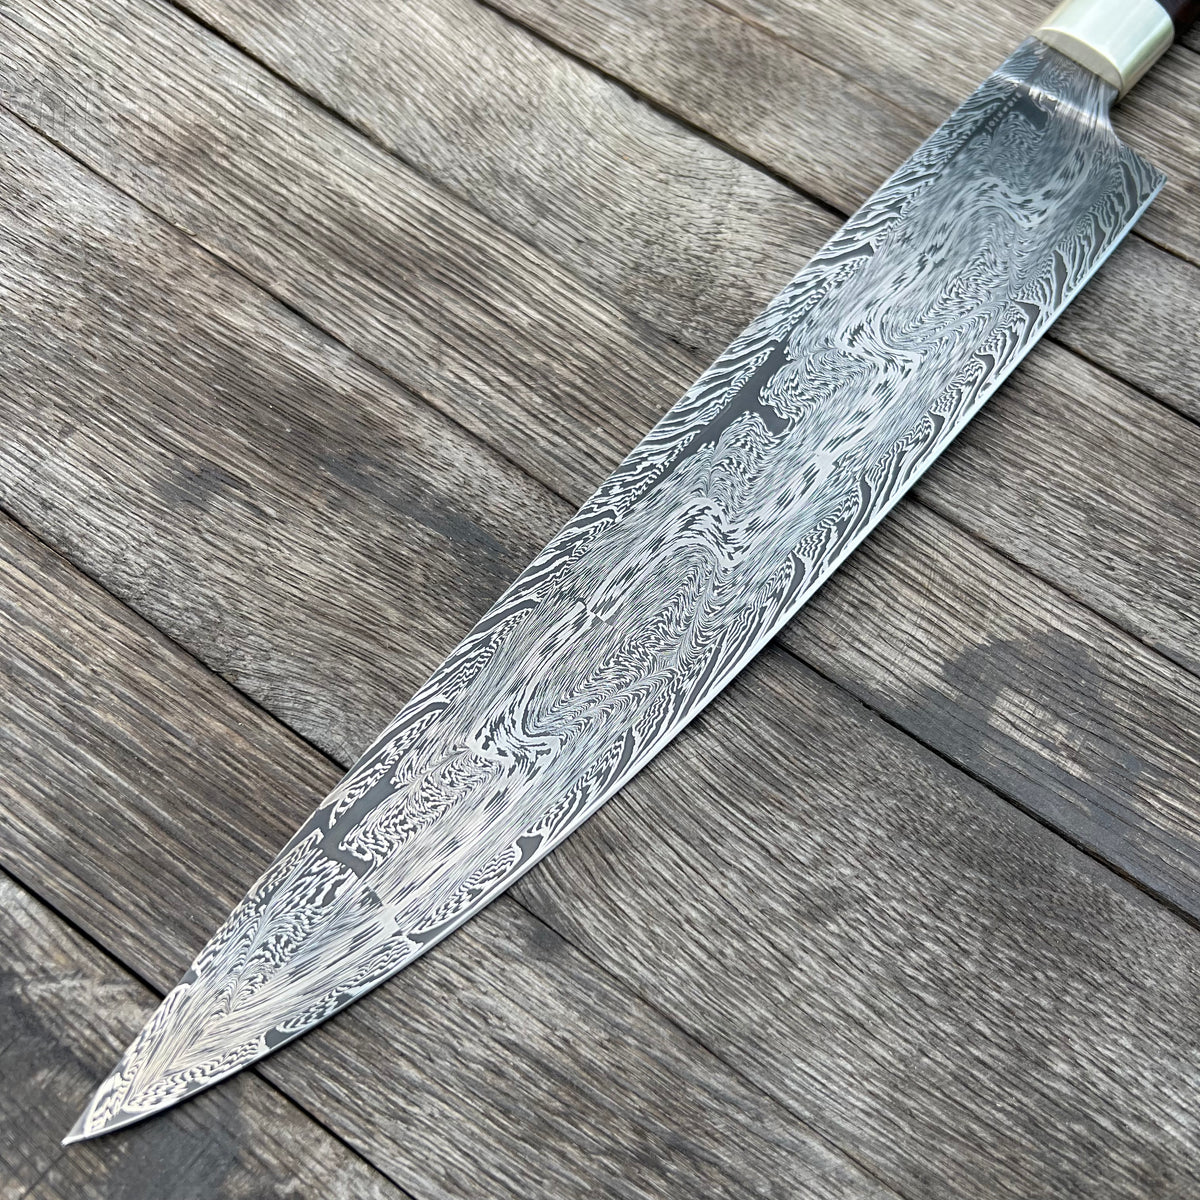 Apple Valley Forge - Custom Integral Mosaic Damascus Chef Knife w